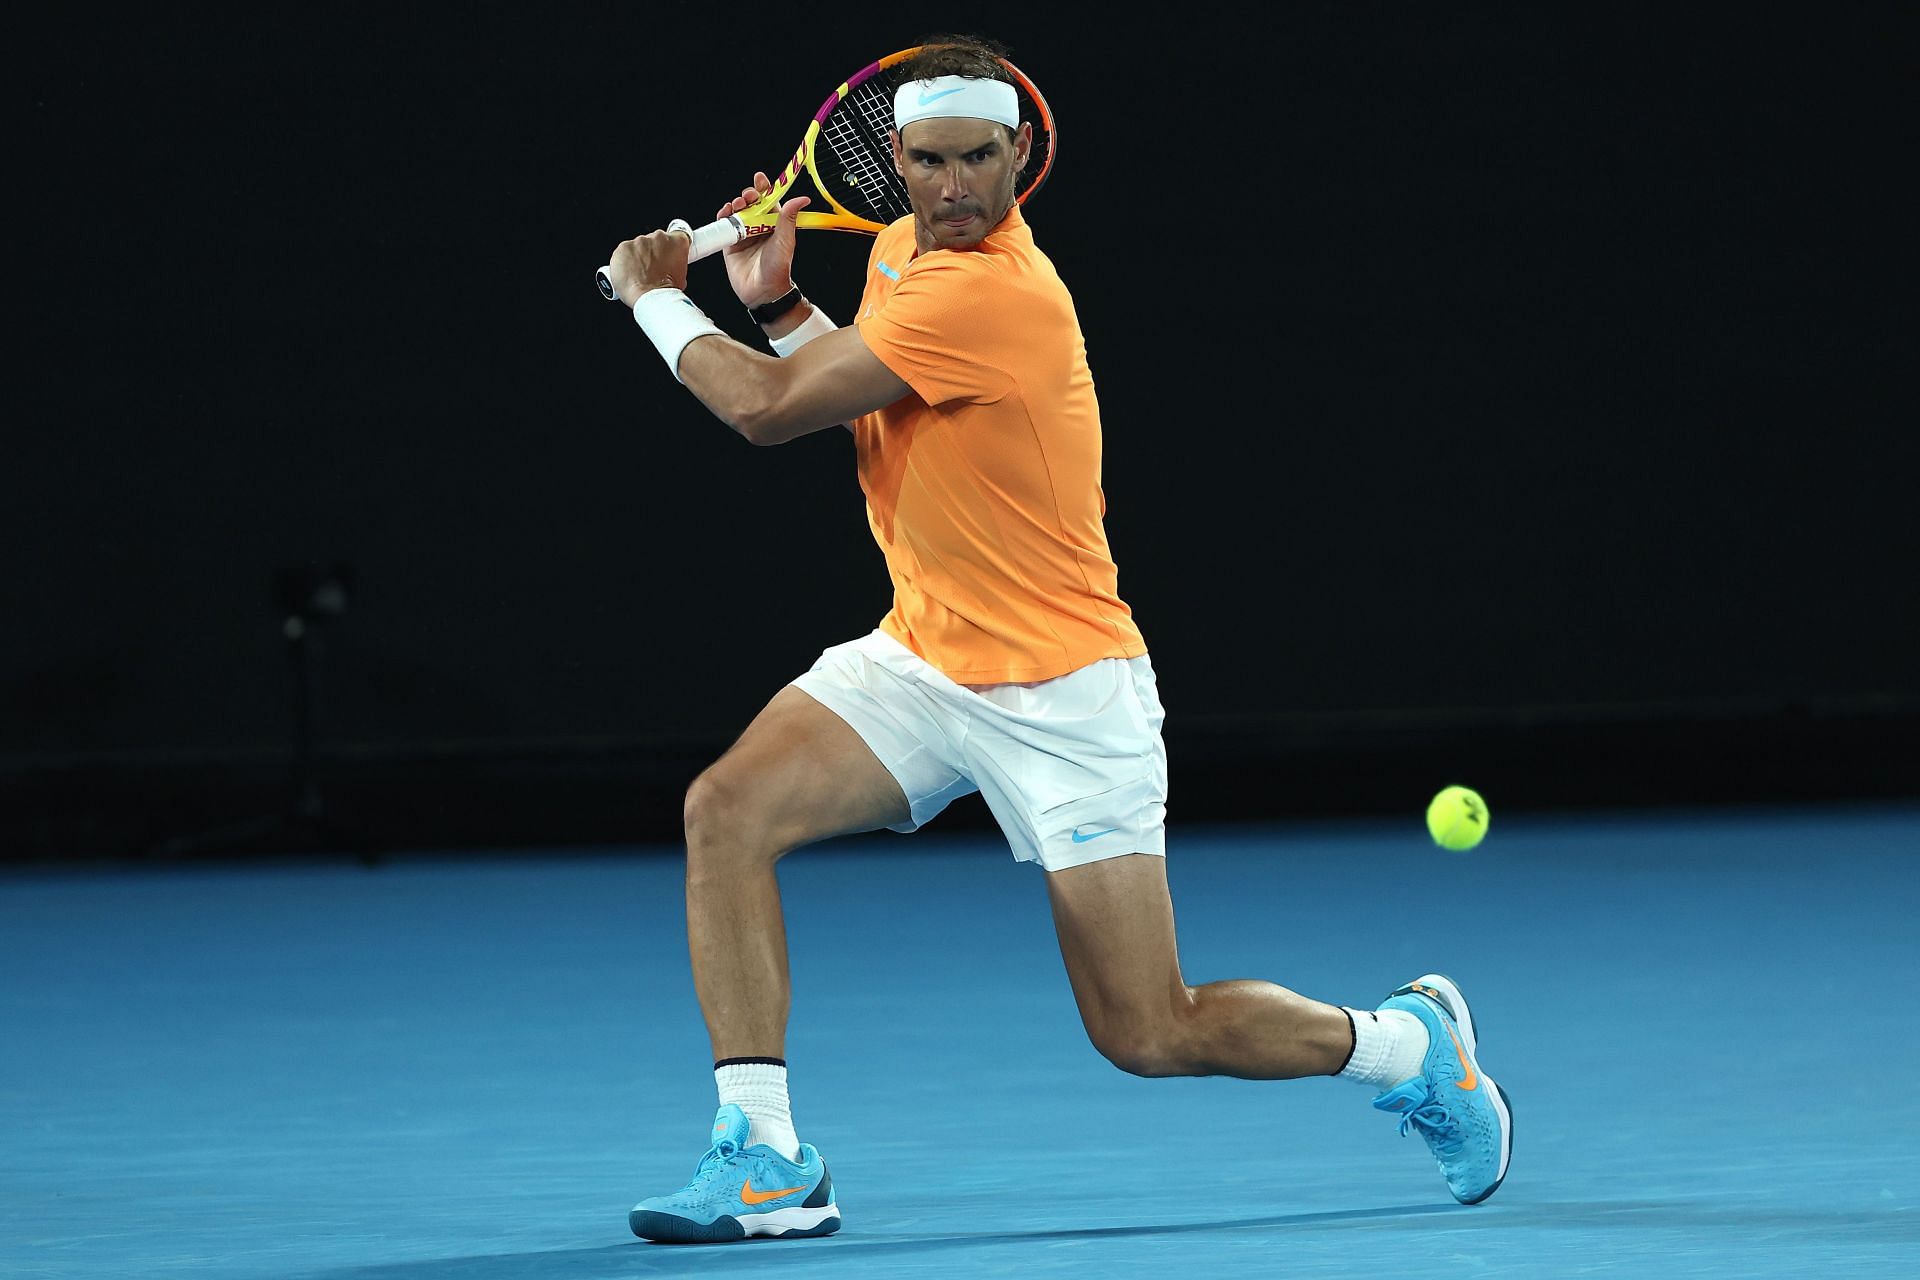 Rafael Nadal in action at the Australian Open 2023